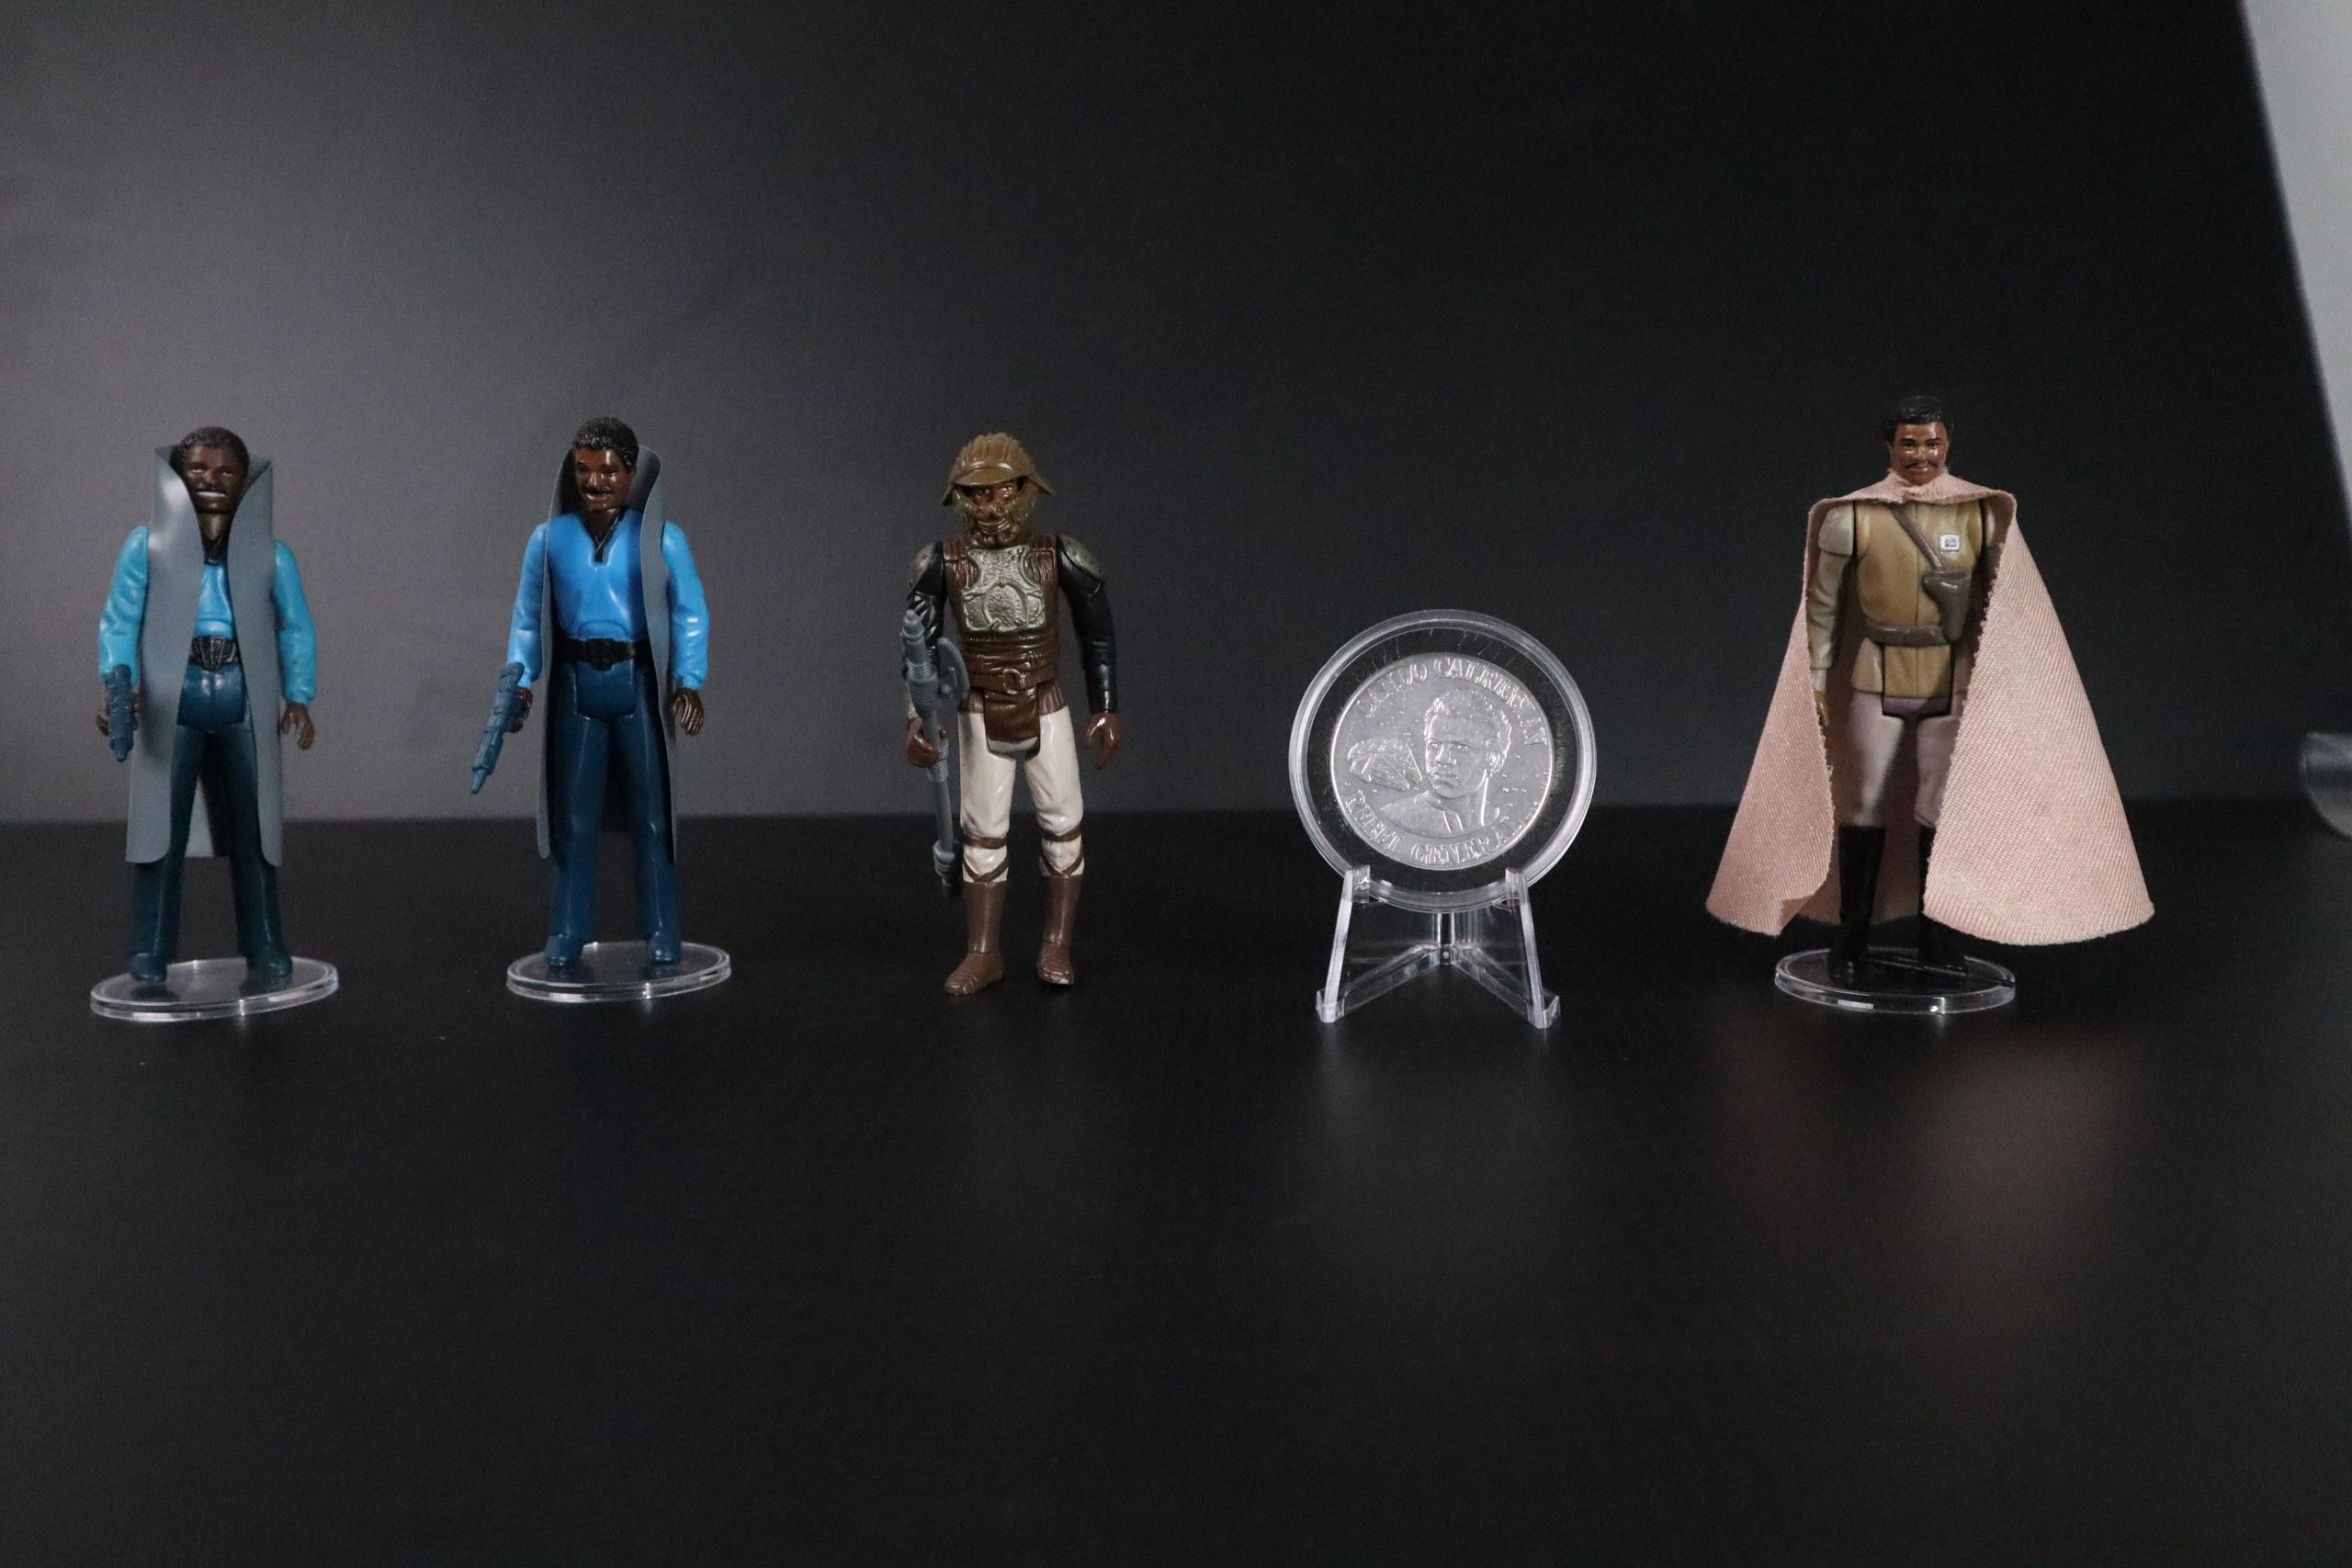 Collecting 'Star Wars' Action Figures: A New Dope